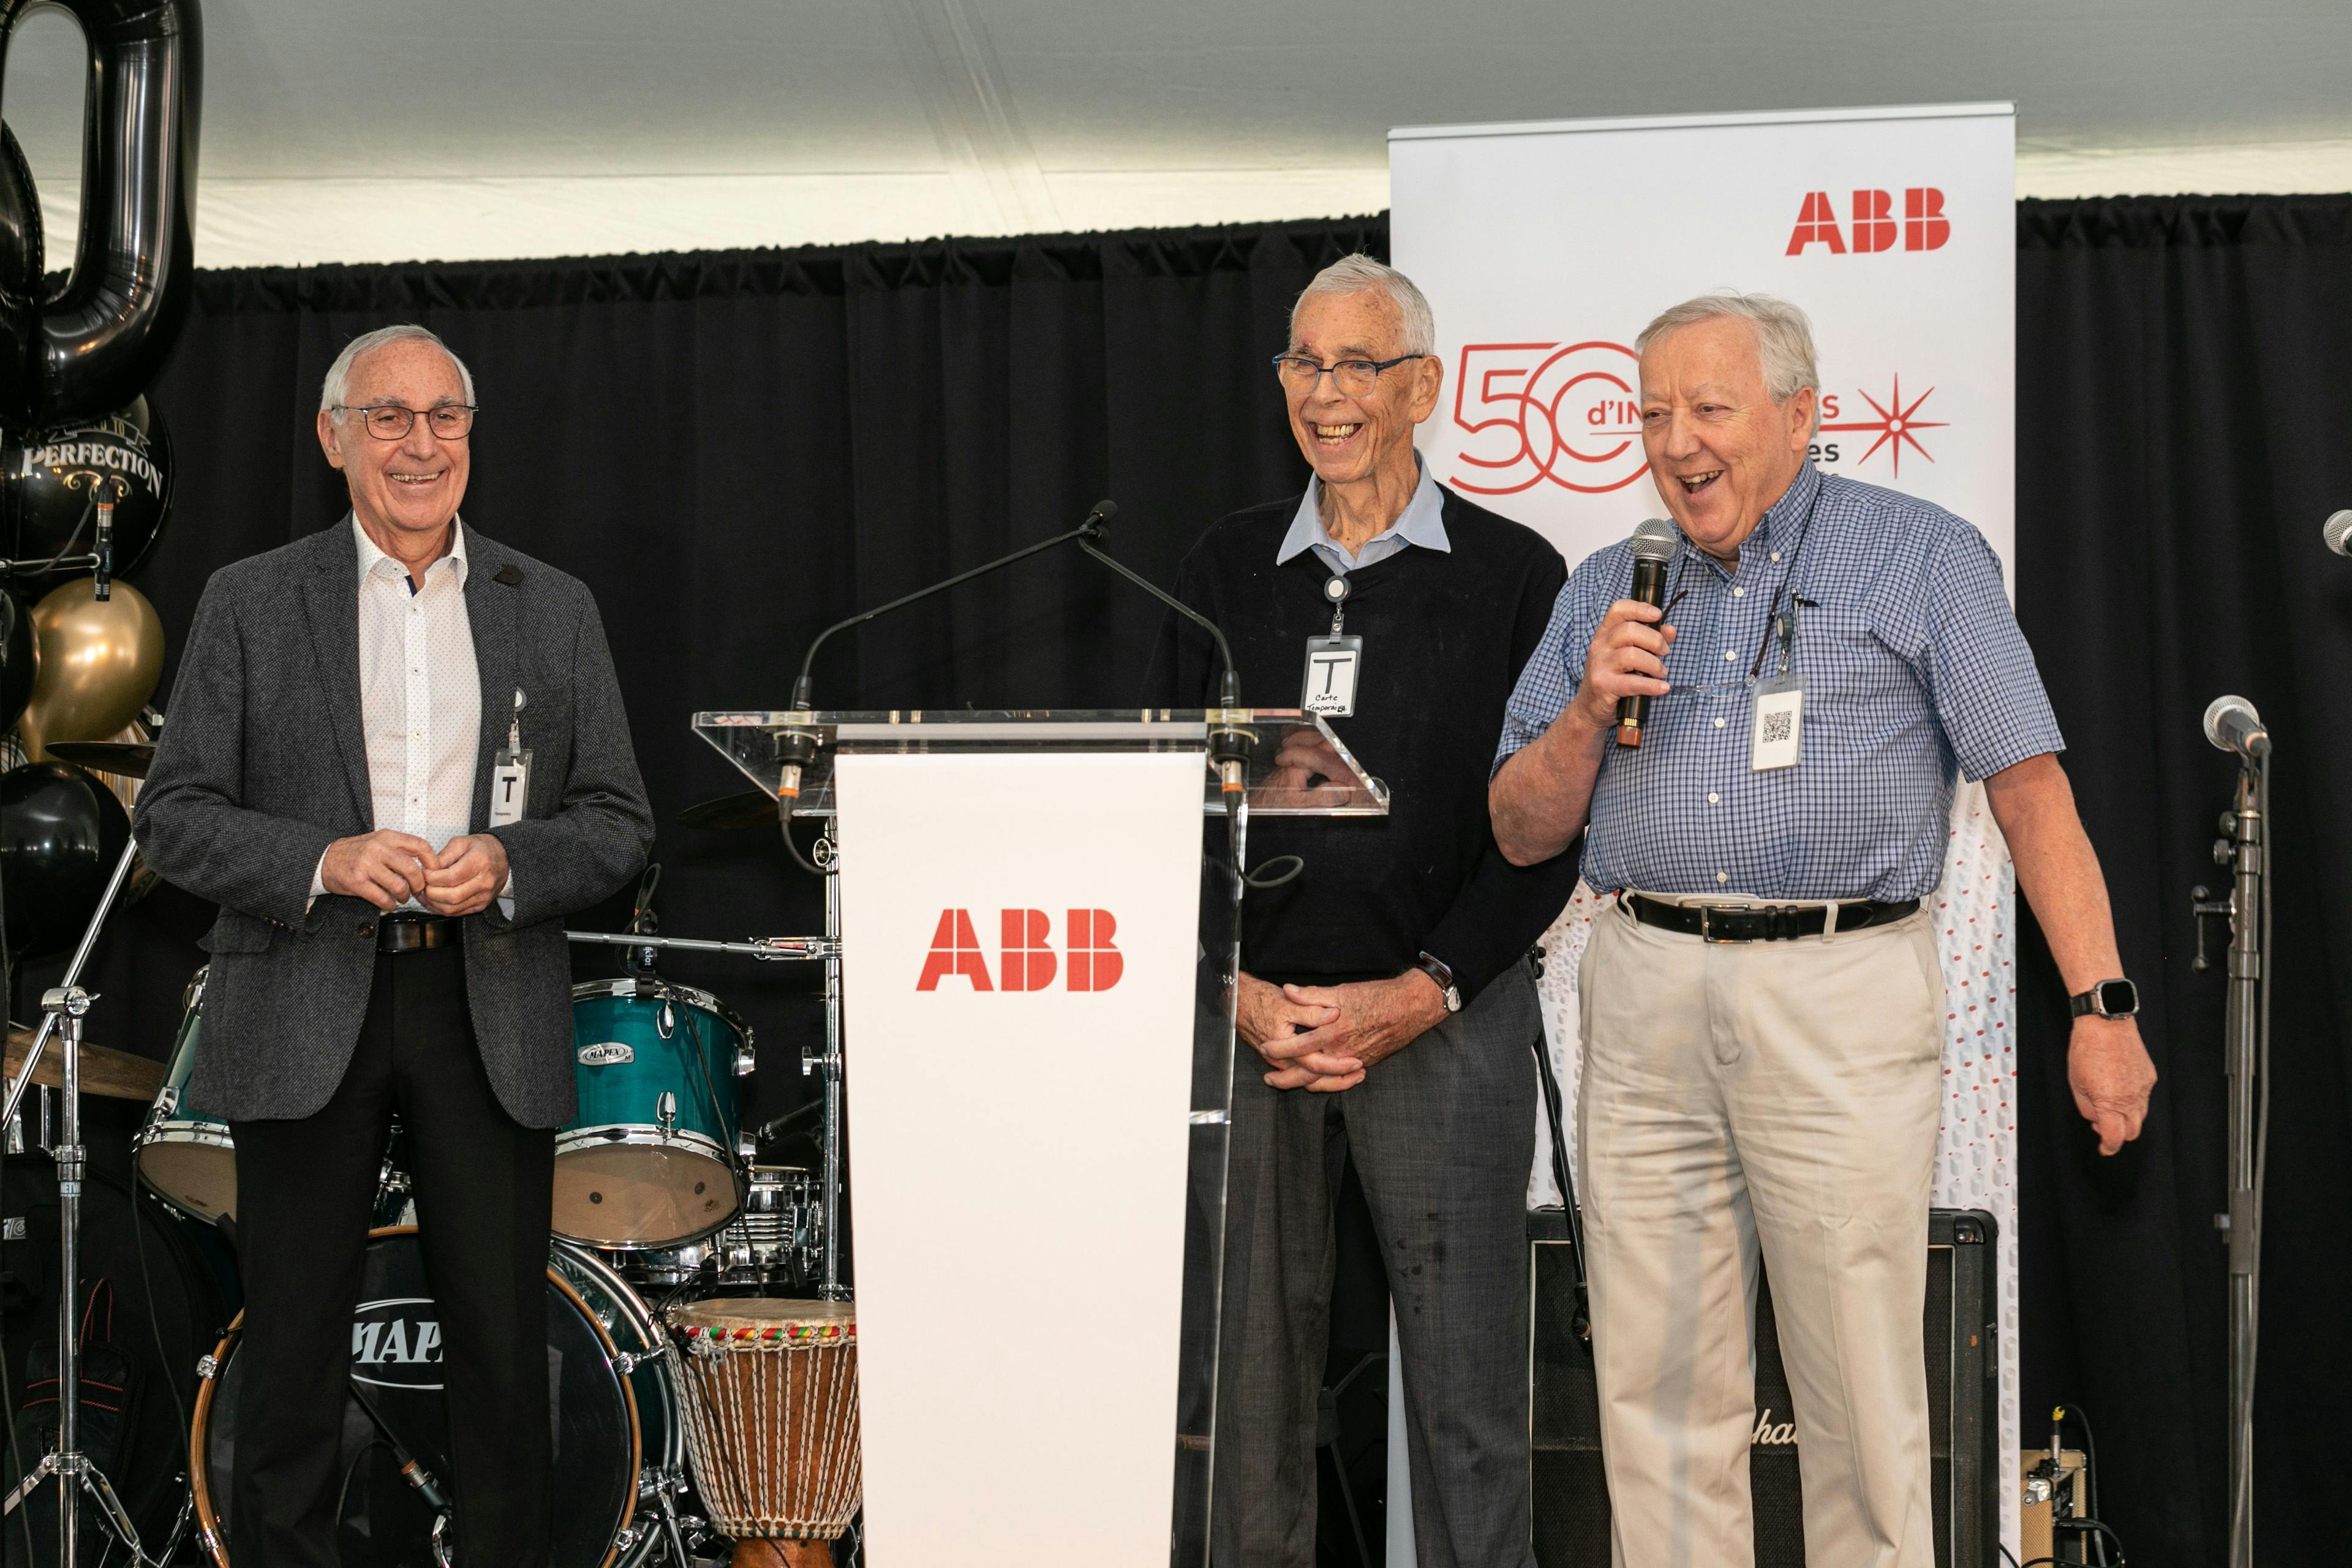 From left to right: Garry Vail, Henry Buijs and Jean-Noel Bérubé